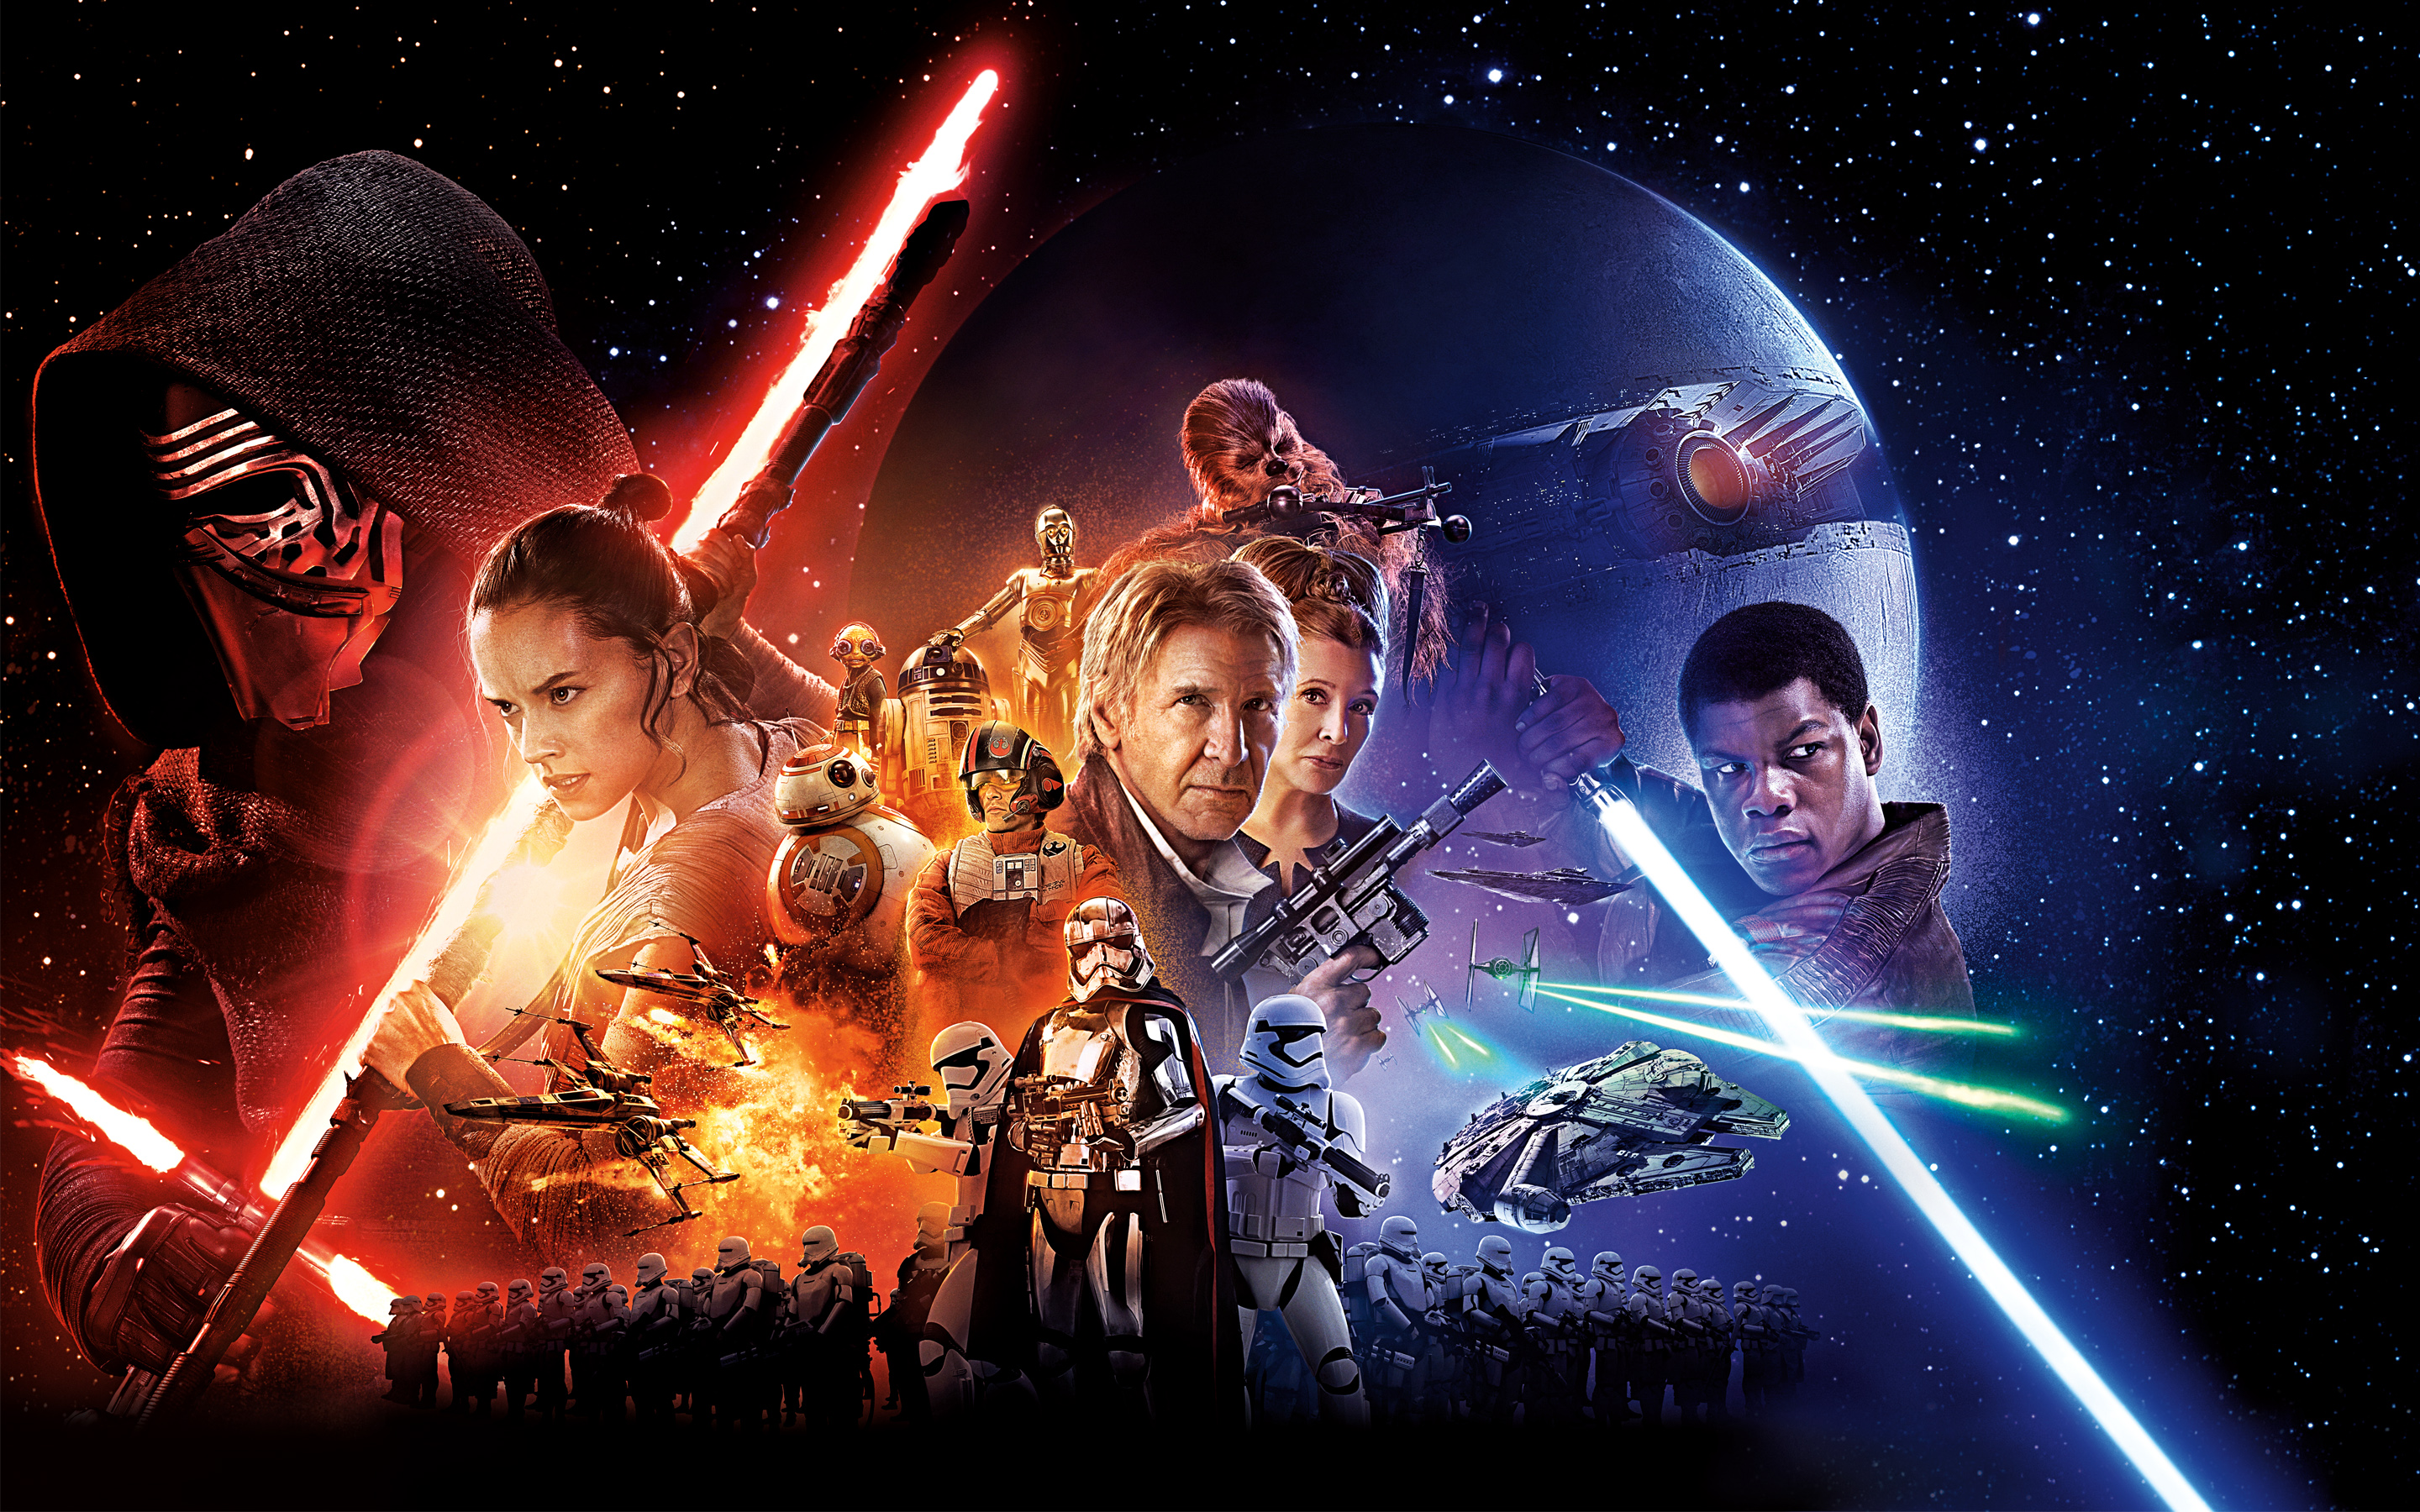  Wars Episode VII The Force Awakens Movie Wallpapers HD Wallpapers